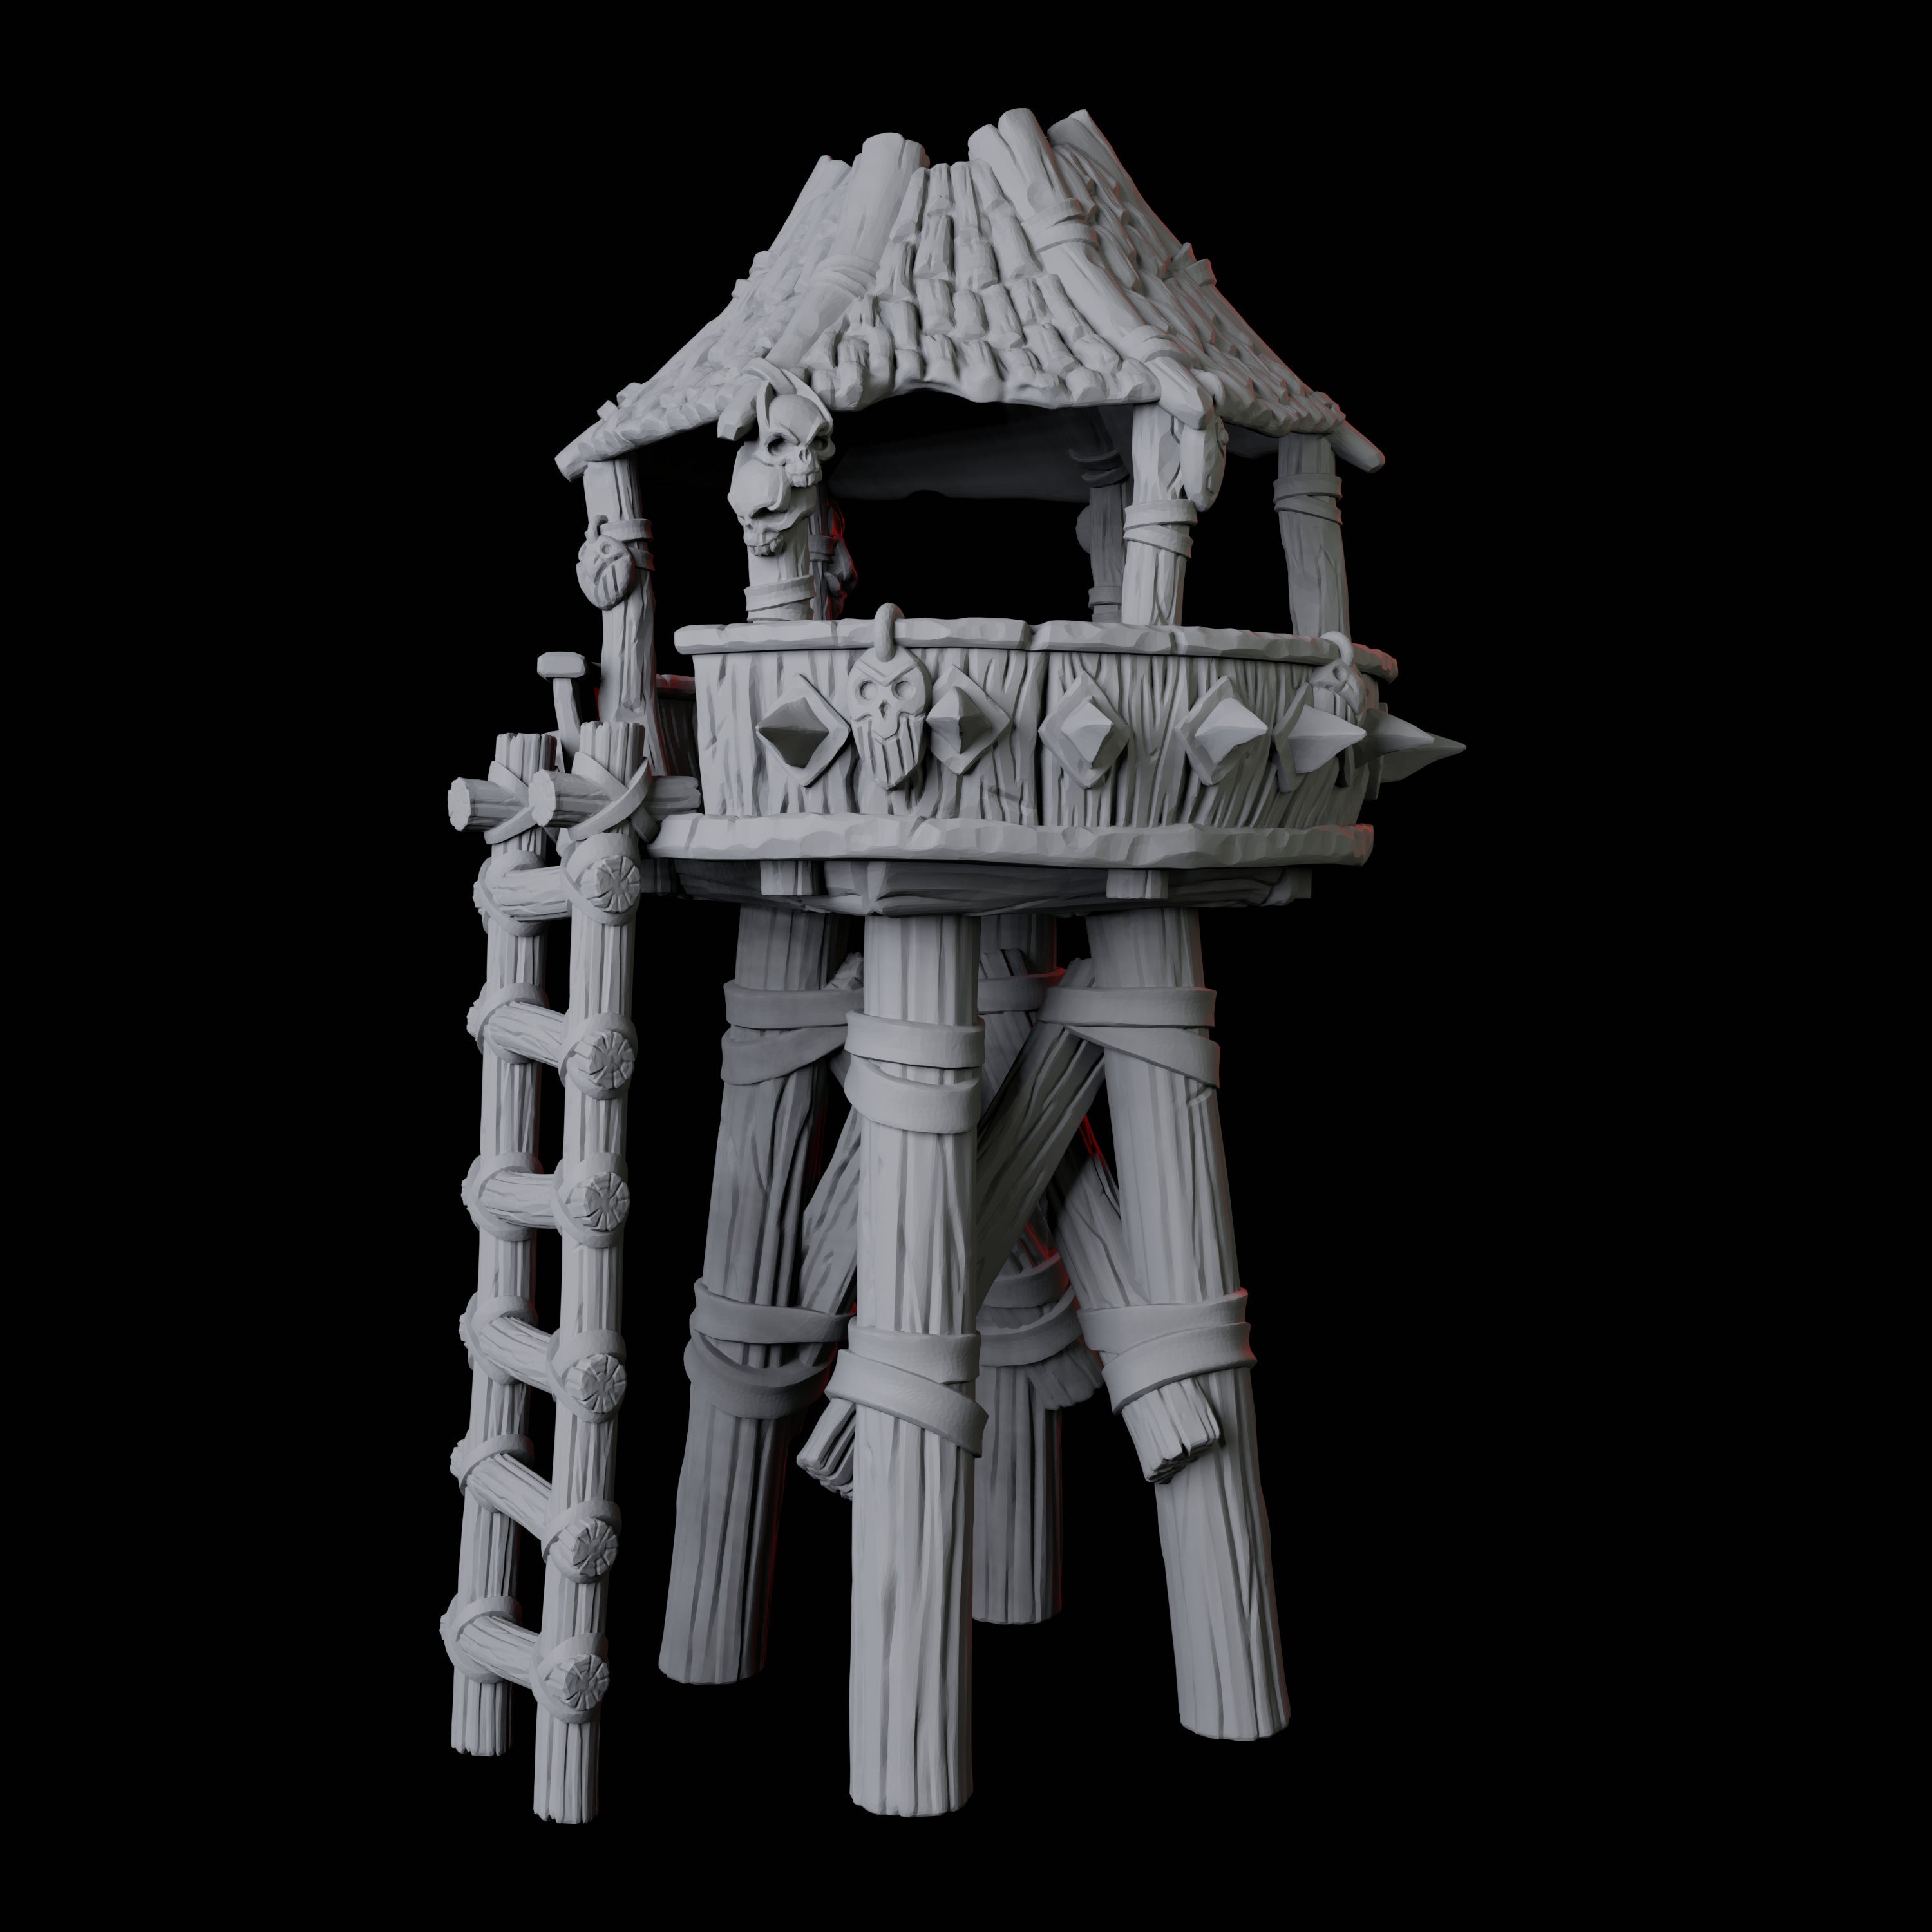 Wooden Watchtower Miniature for Dungeons and Dragons, Pathfinder or other TTRPGs